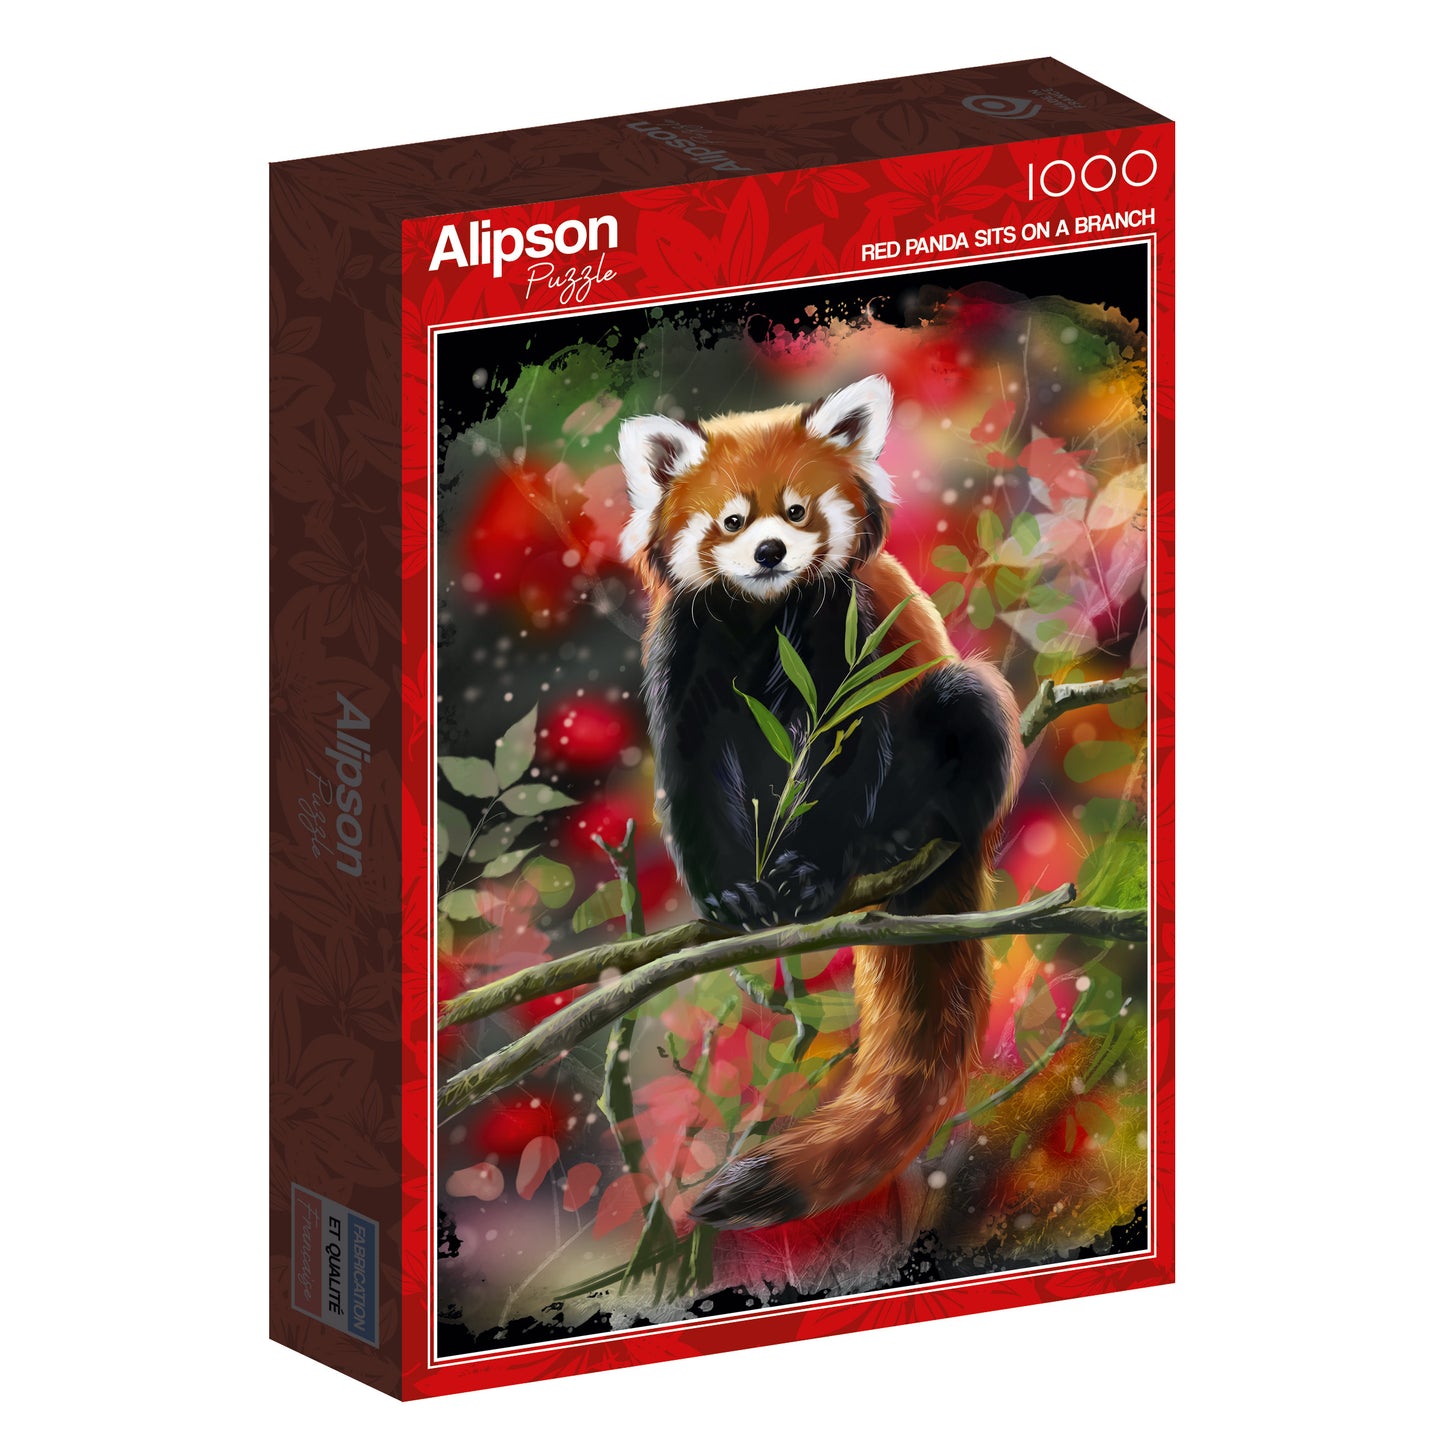 Alipson - Red Panda Sits On A Branch - 1000 Piece Jigsaw Puzzle